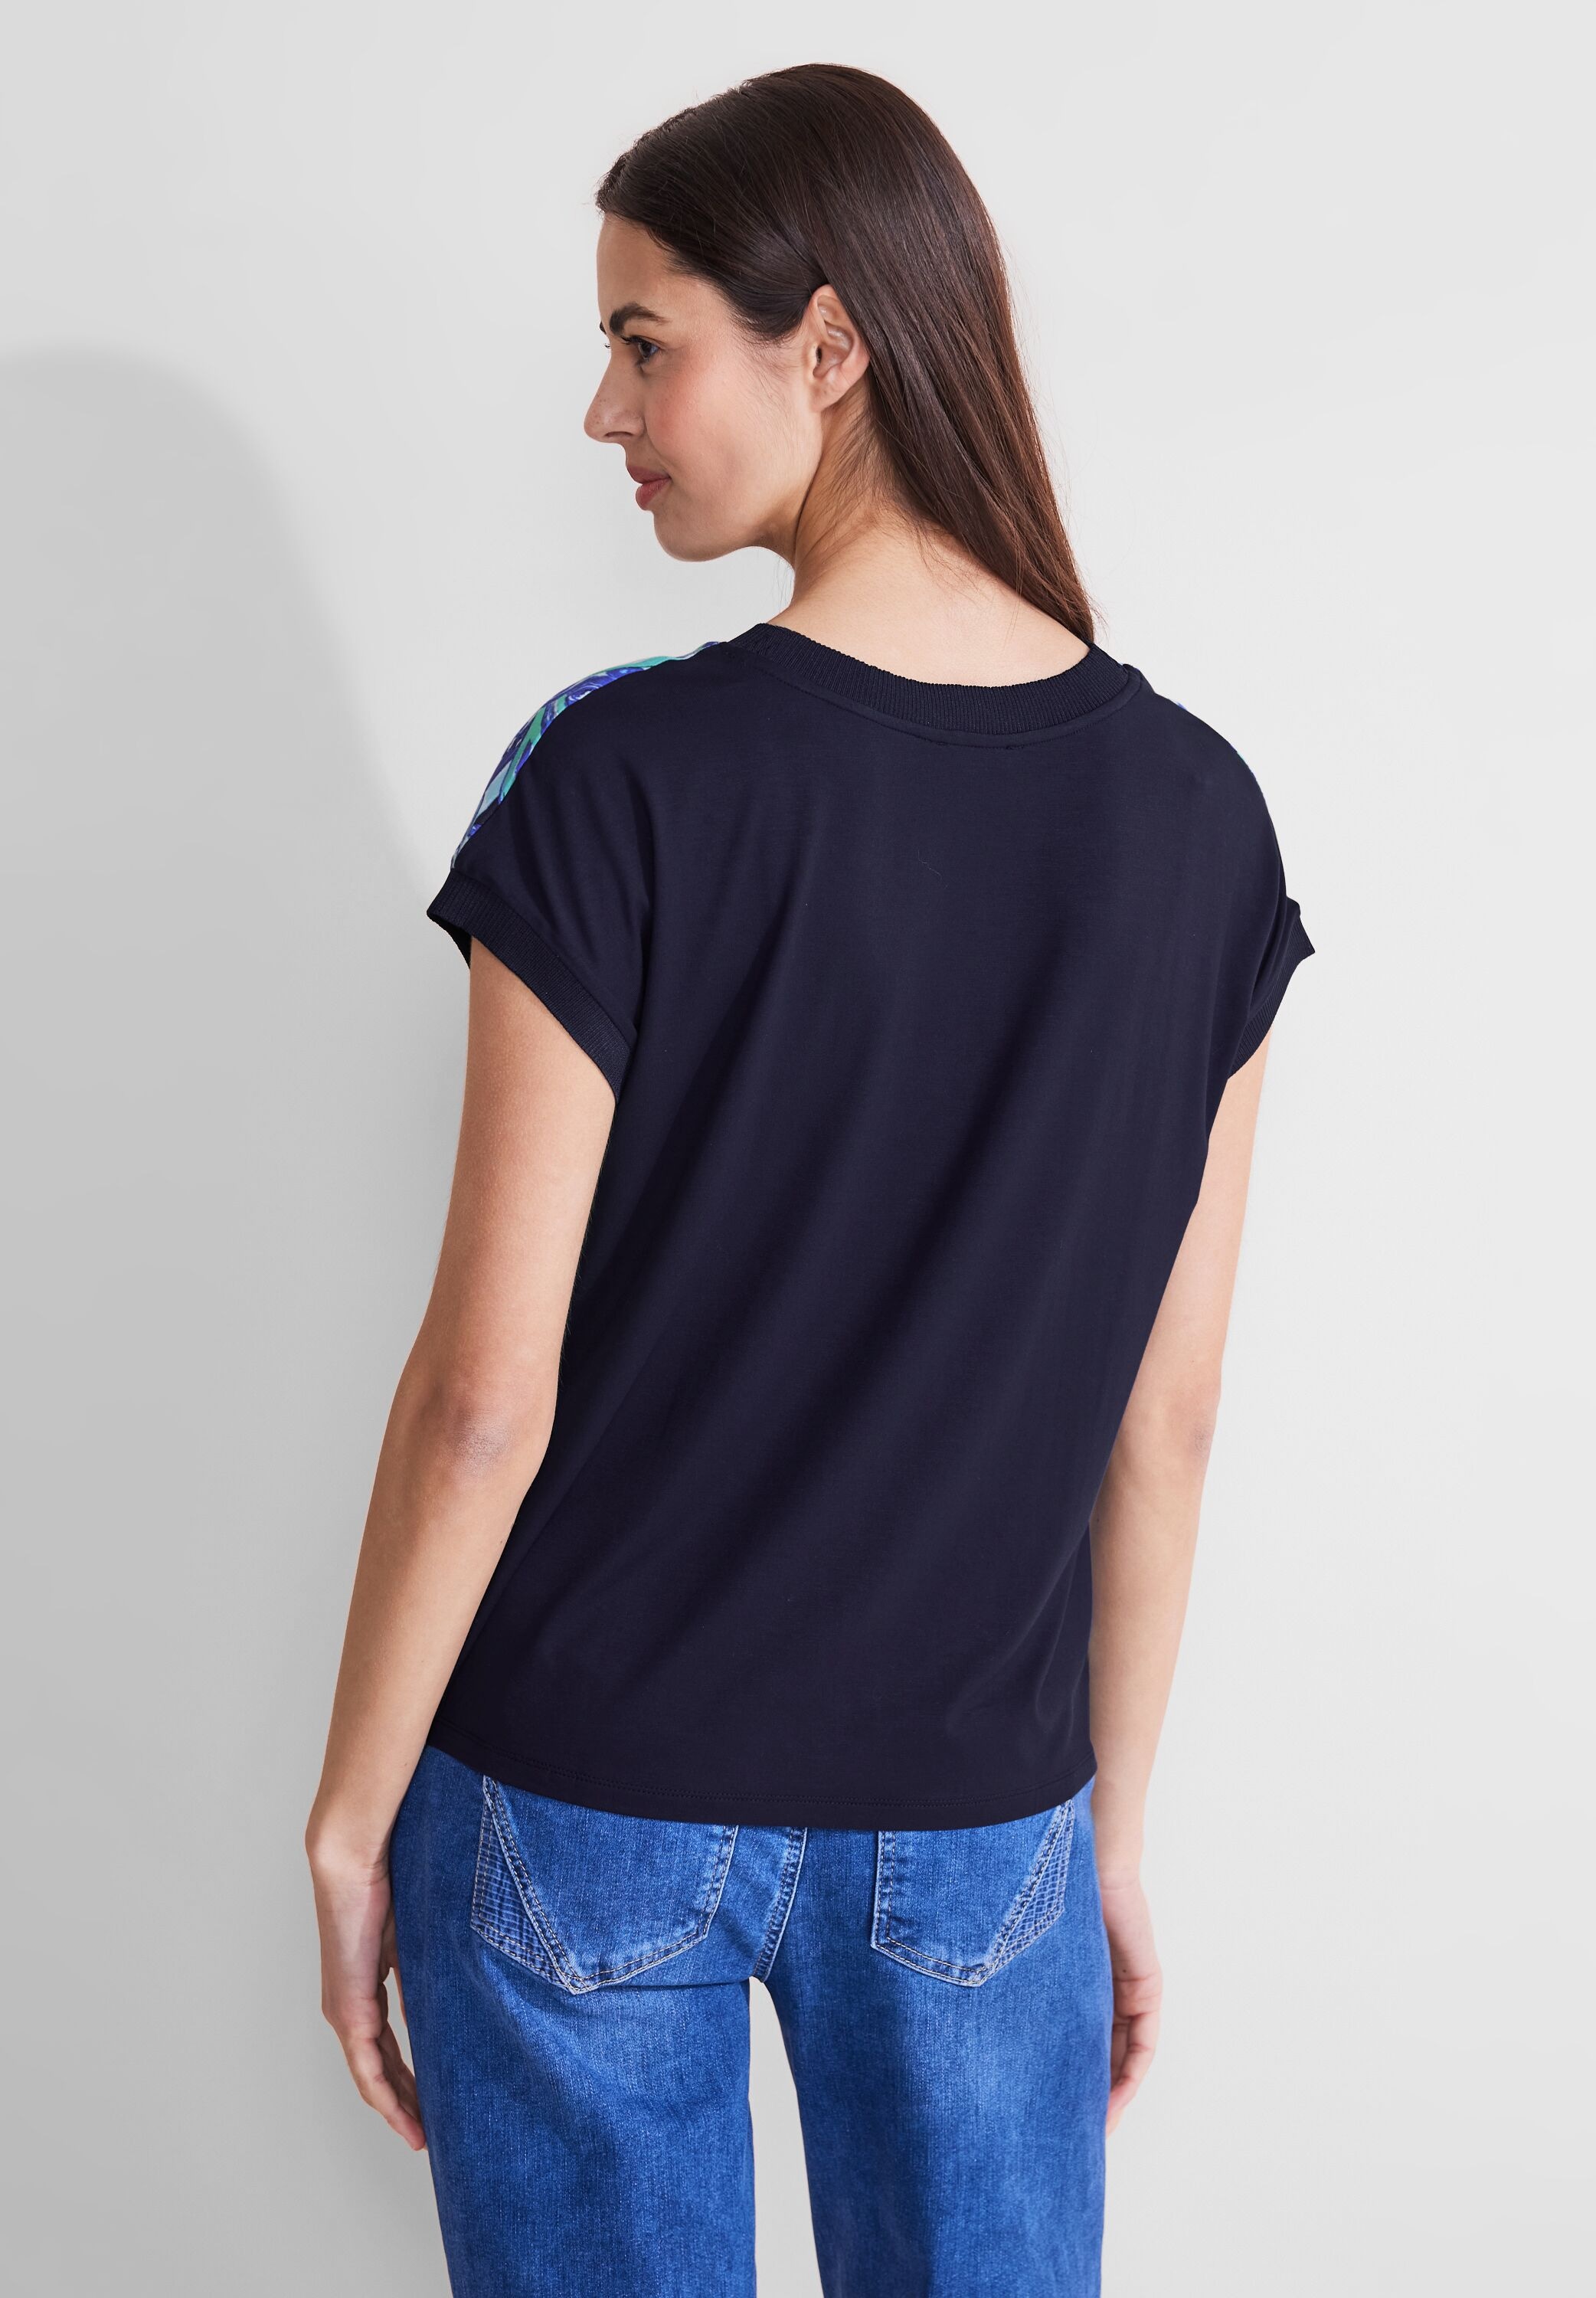 STREET ONE Shirttop, mit Muster